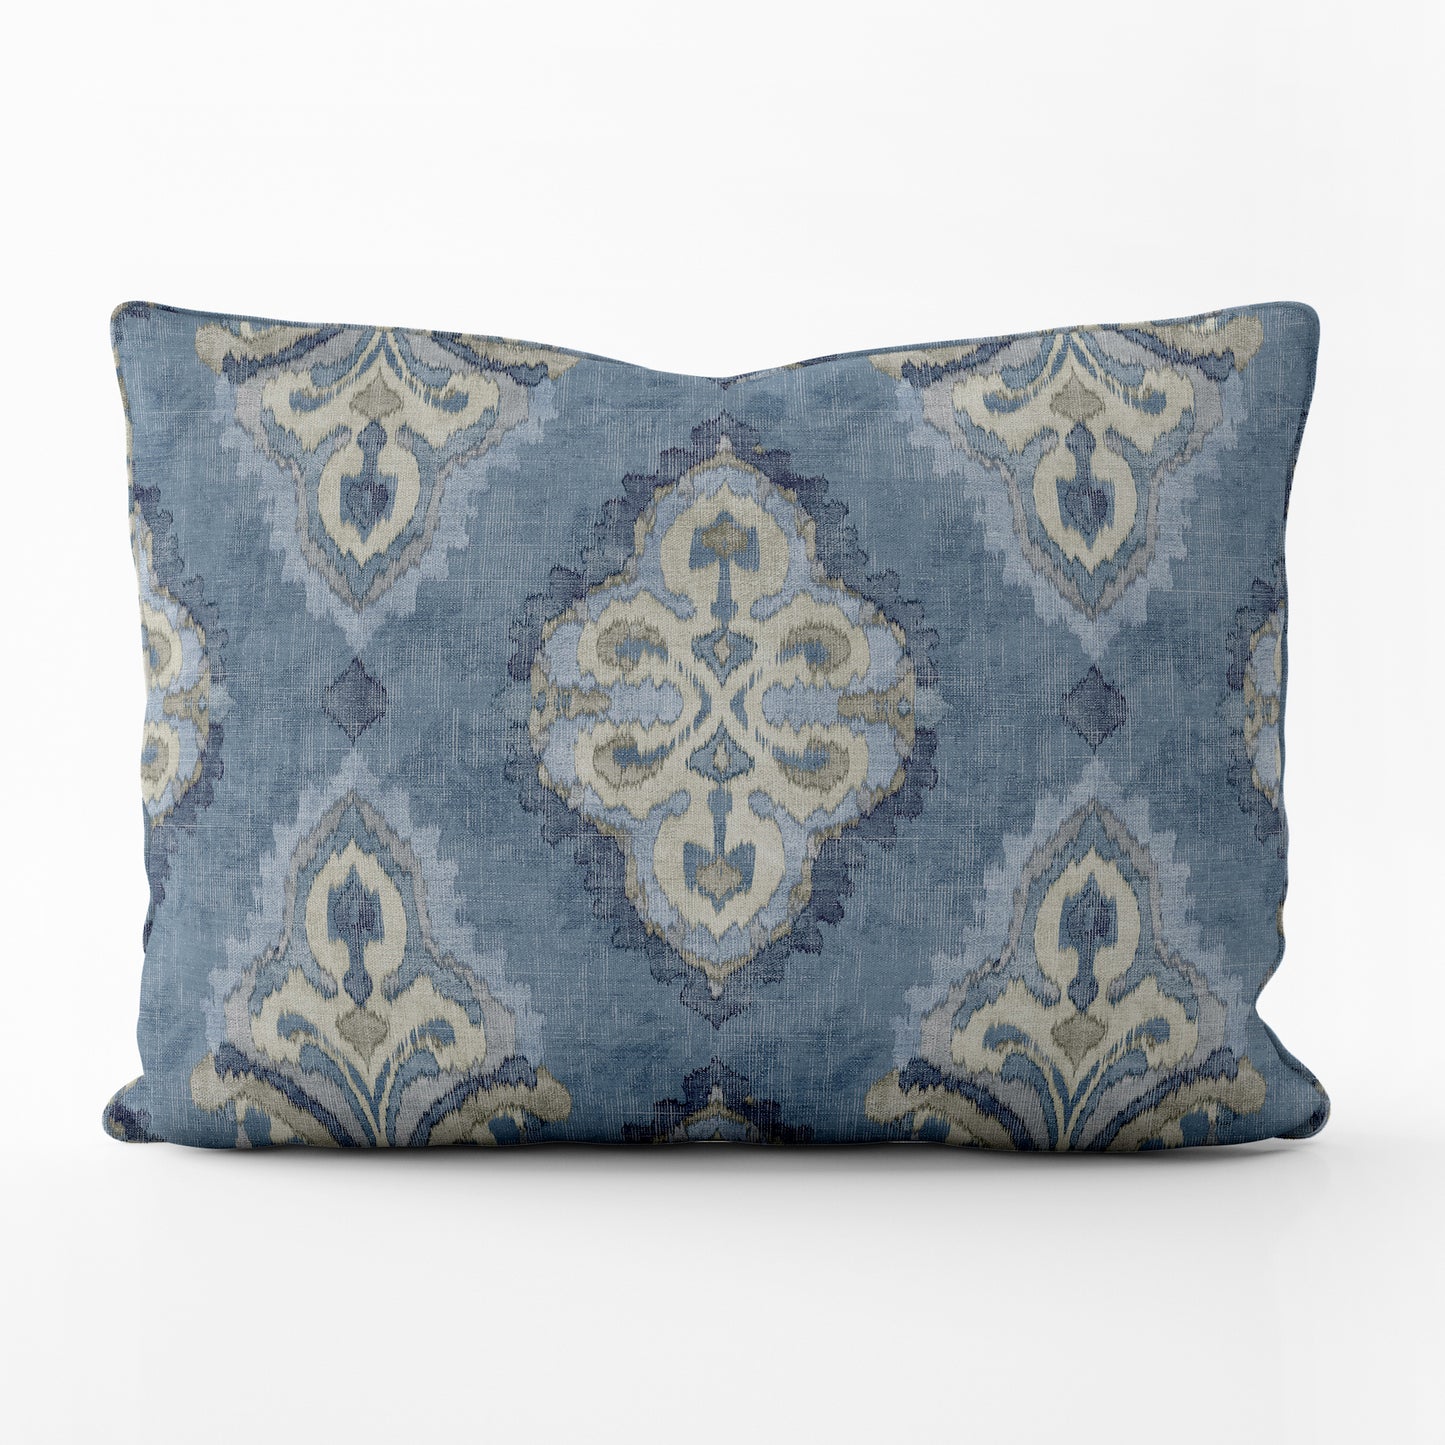 Decorative Pillows in Queen Delft Blue Medallion Watercolor- Large Scale